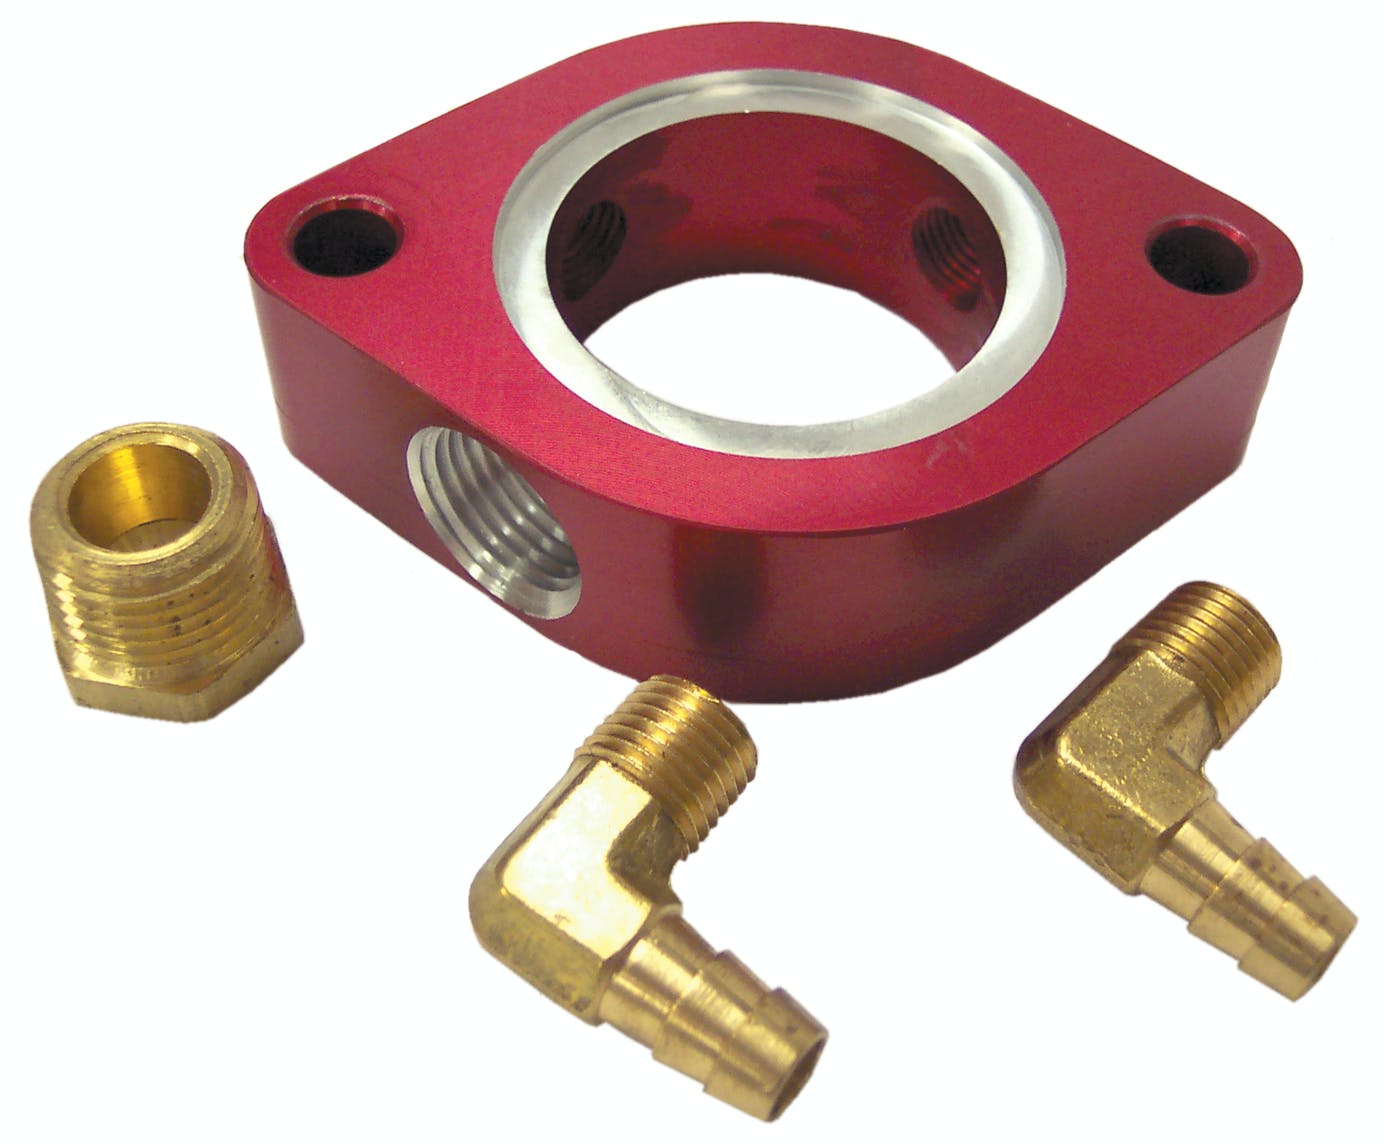 Northern Radiator Z16581 Anodized Aluminum Flow Restrictor - 1 3/4 Inch Red